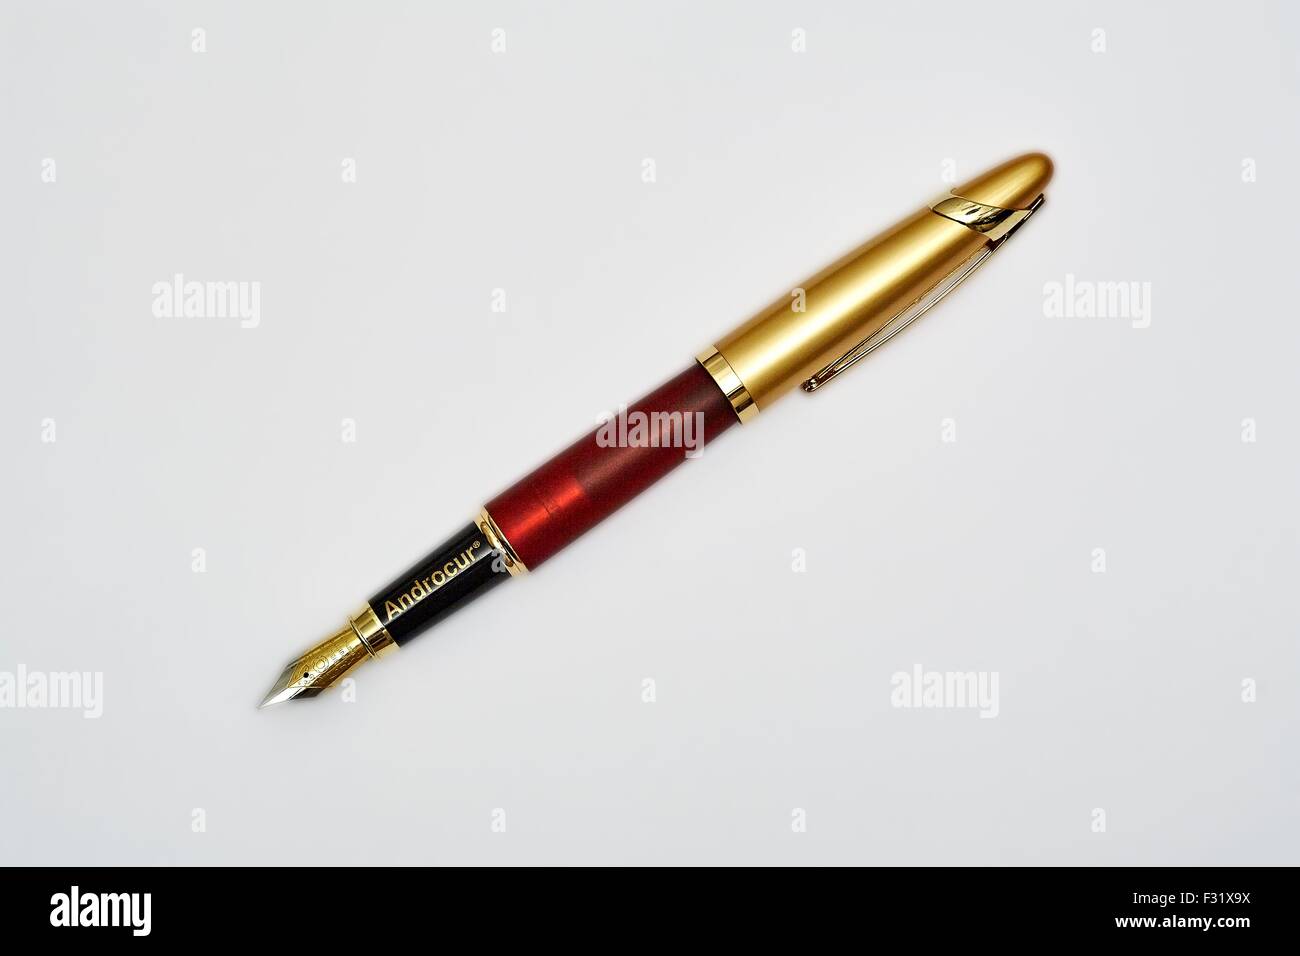 The Gold Ink Pen Is Mightier than the Sword Iridium Point Made in Germany, Stock Photo